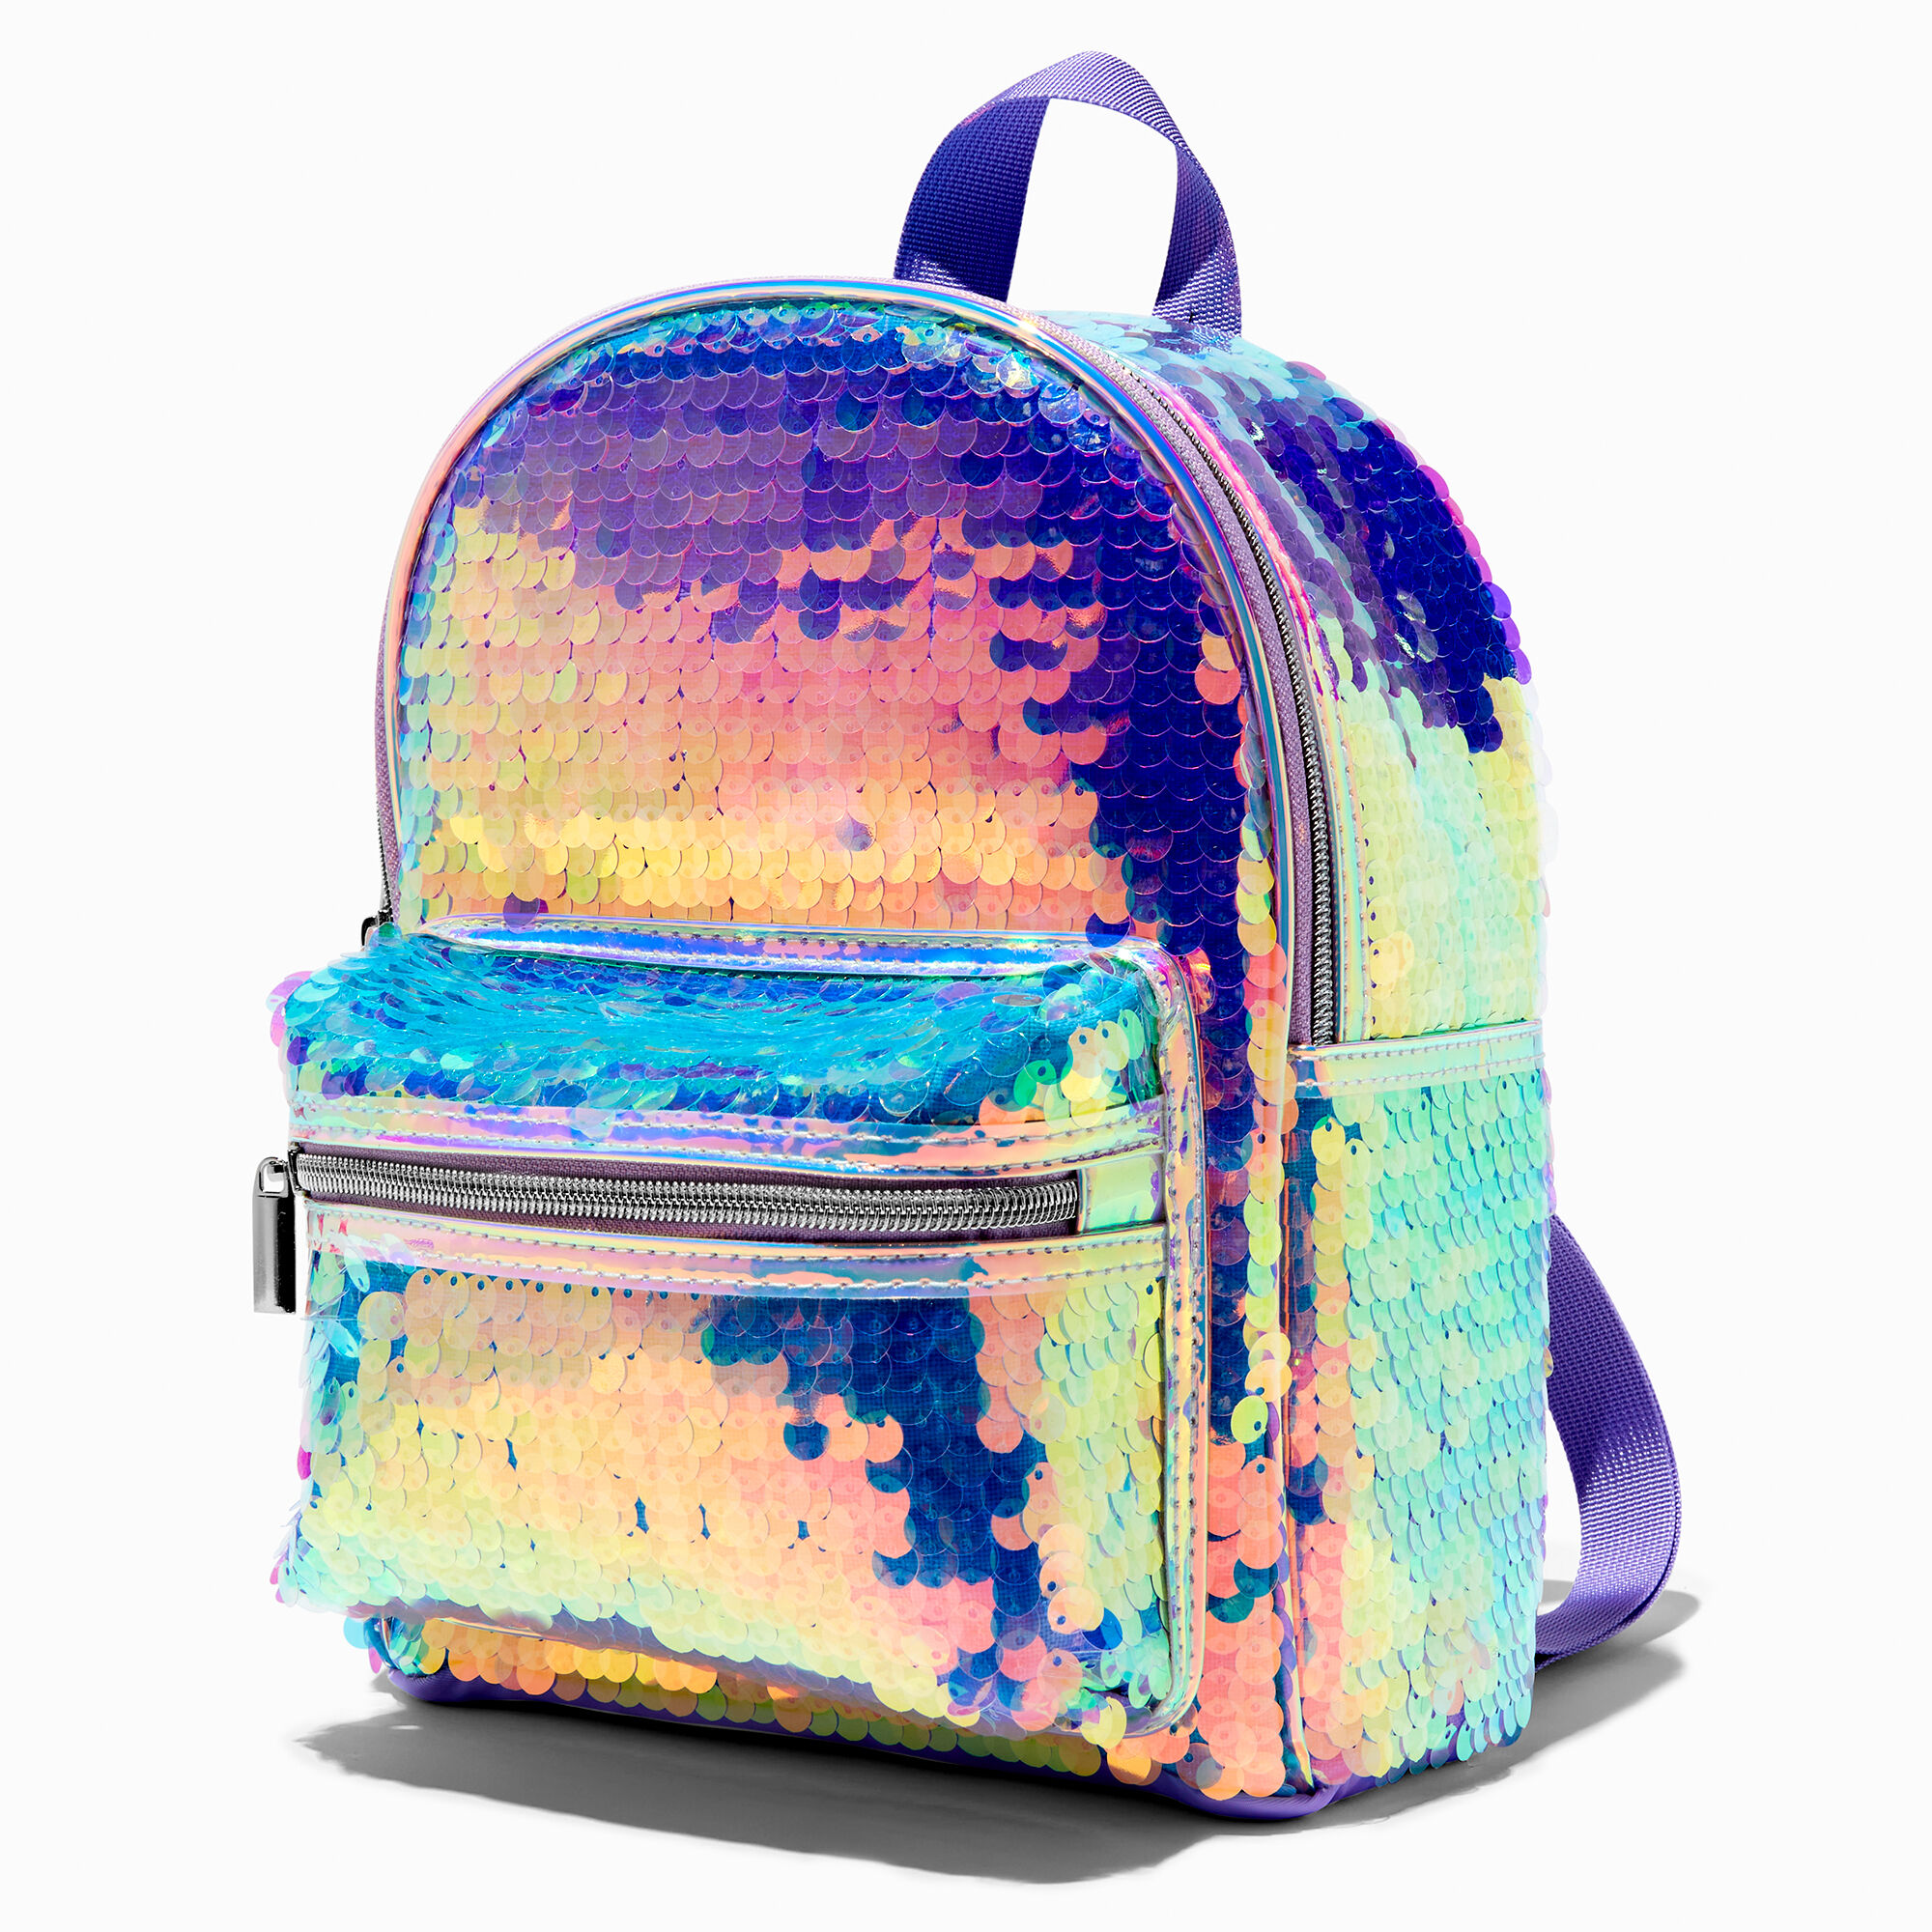 View Claires Sequin Backpack Rainbow information